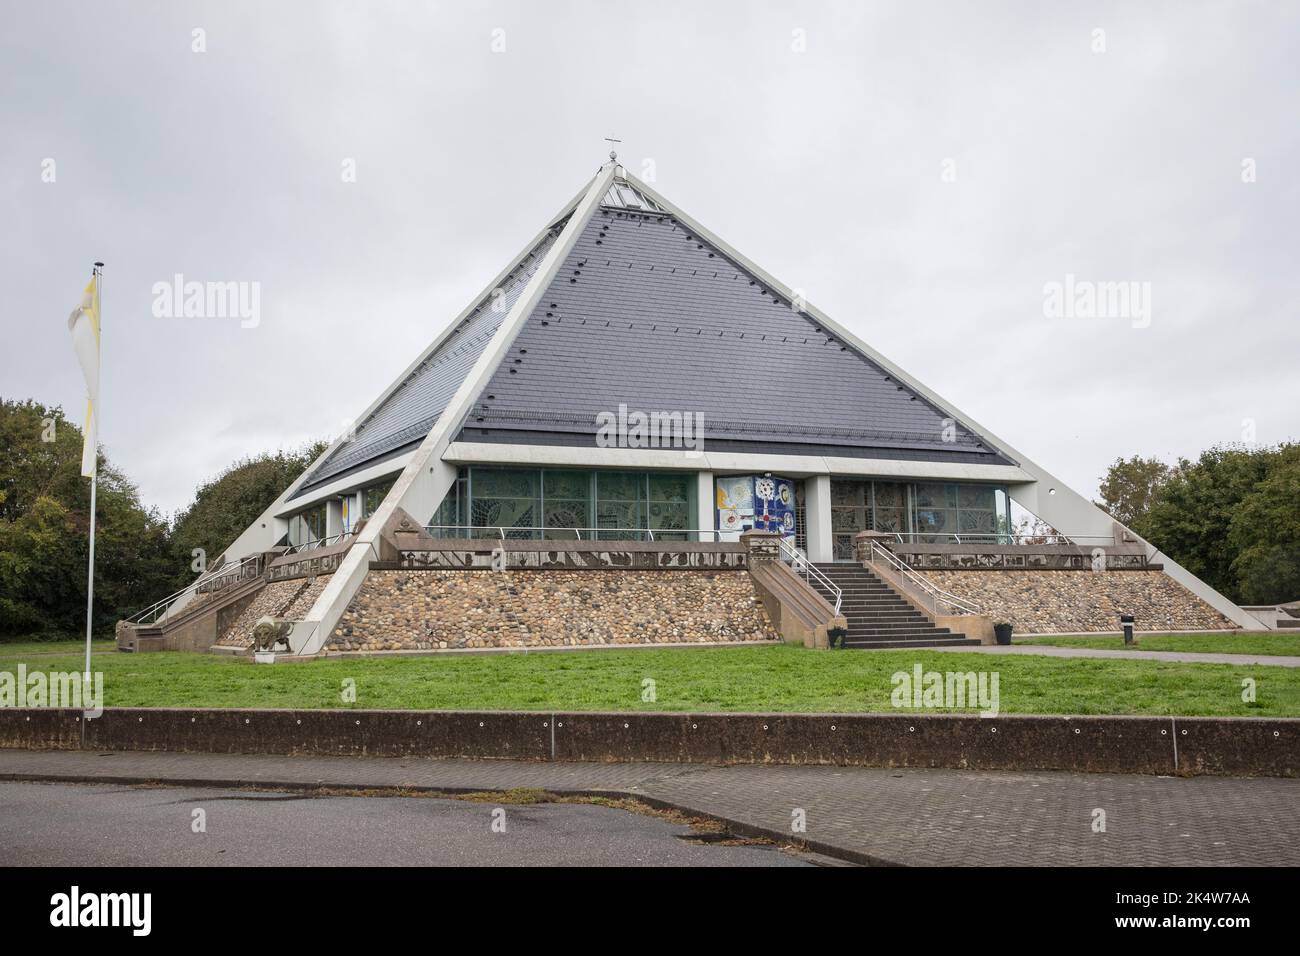 the pyramid shape church St. Christopher on the A5 freeway near Baden-Baden, Baden-Wuerttemberg, Germany. die pyramidenfoermige Autobahnkirche St. Chr Stock Photo